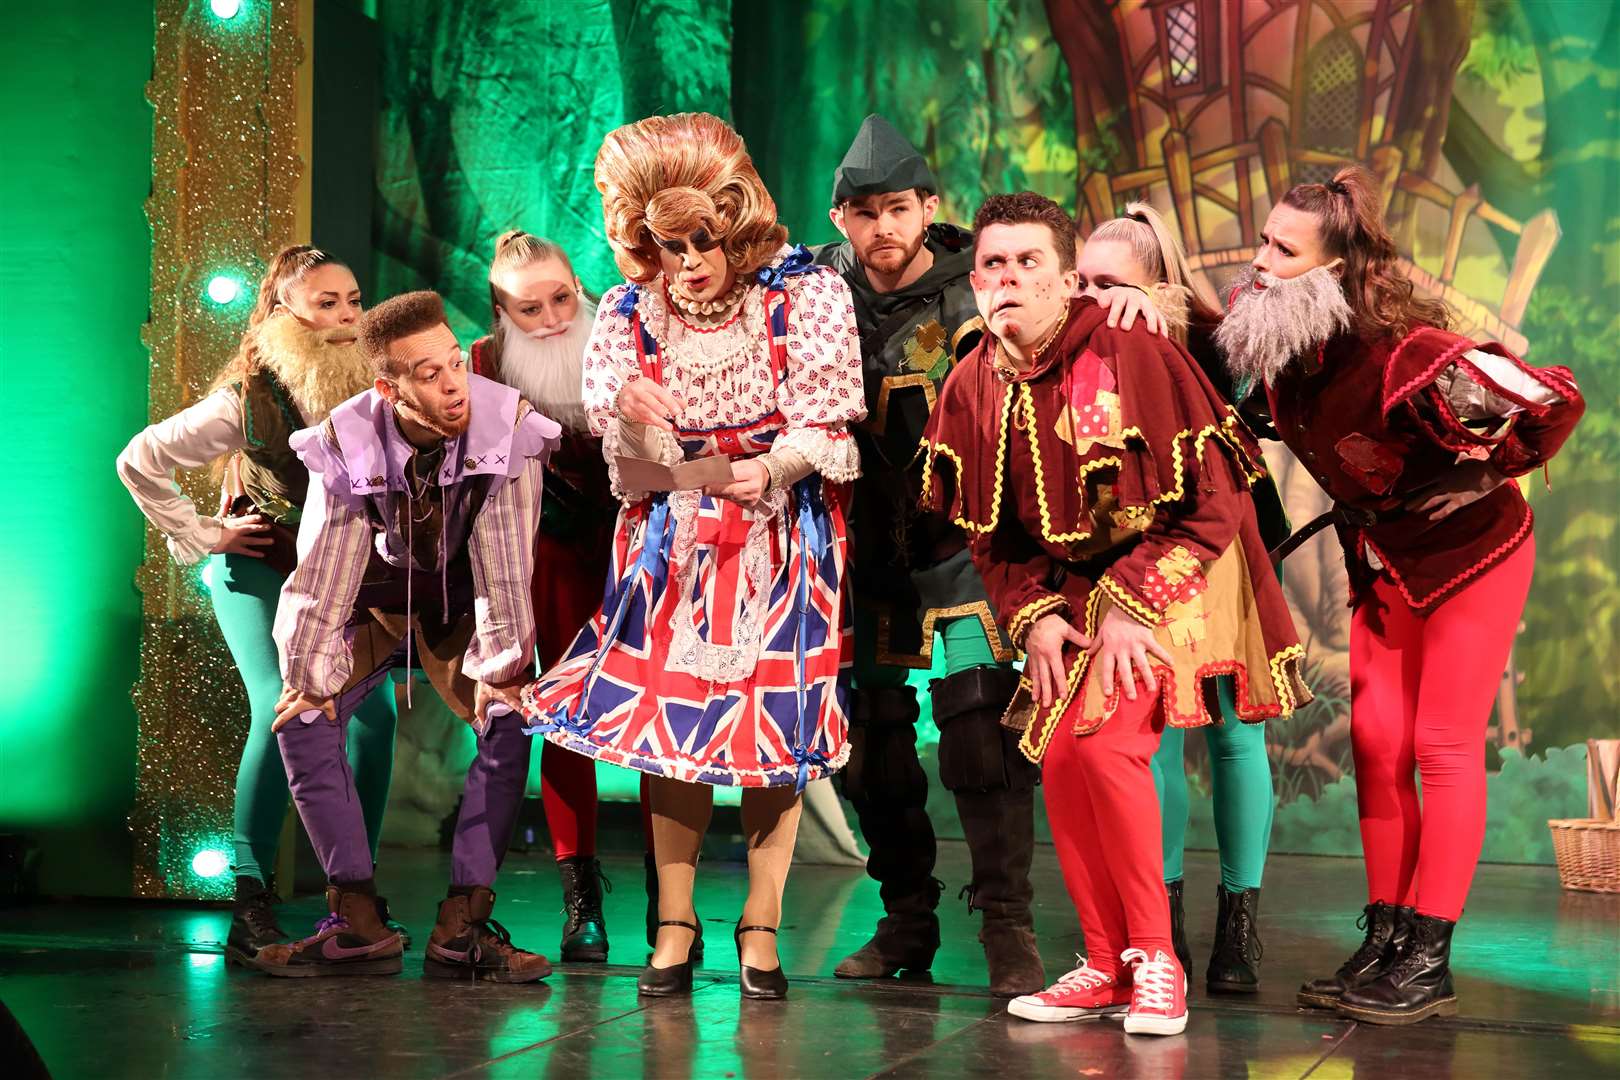 The cast of Robin Hood at The Woodville, Gravesend Picture: Gravesham council